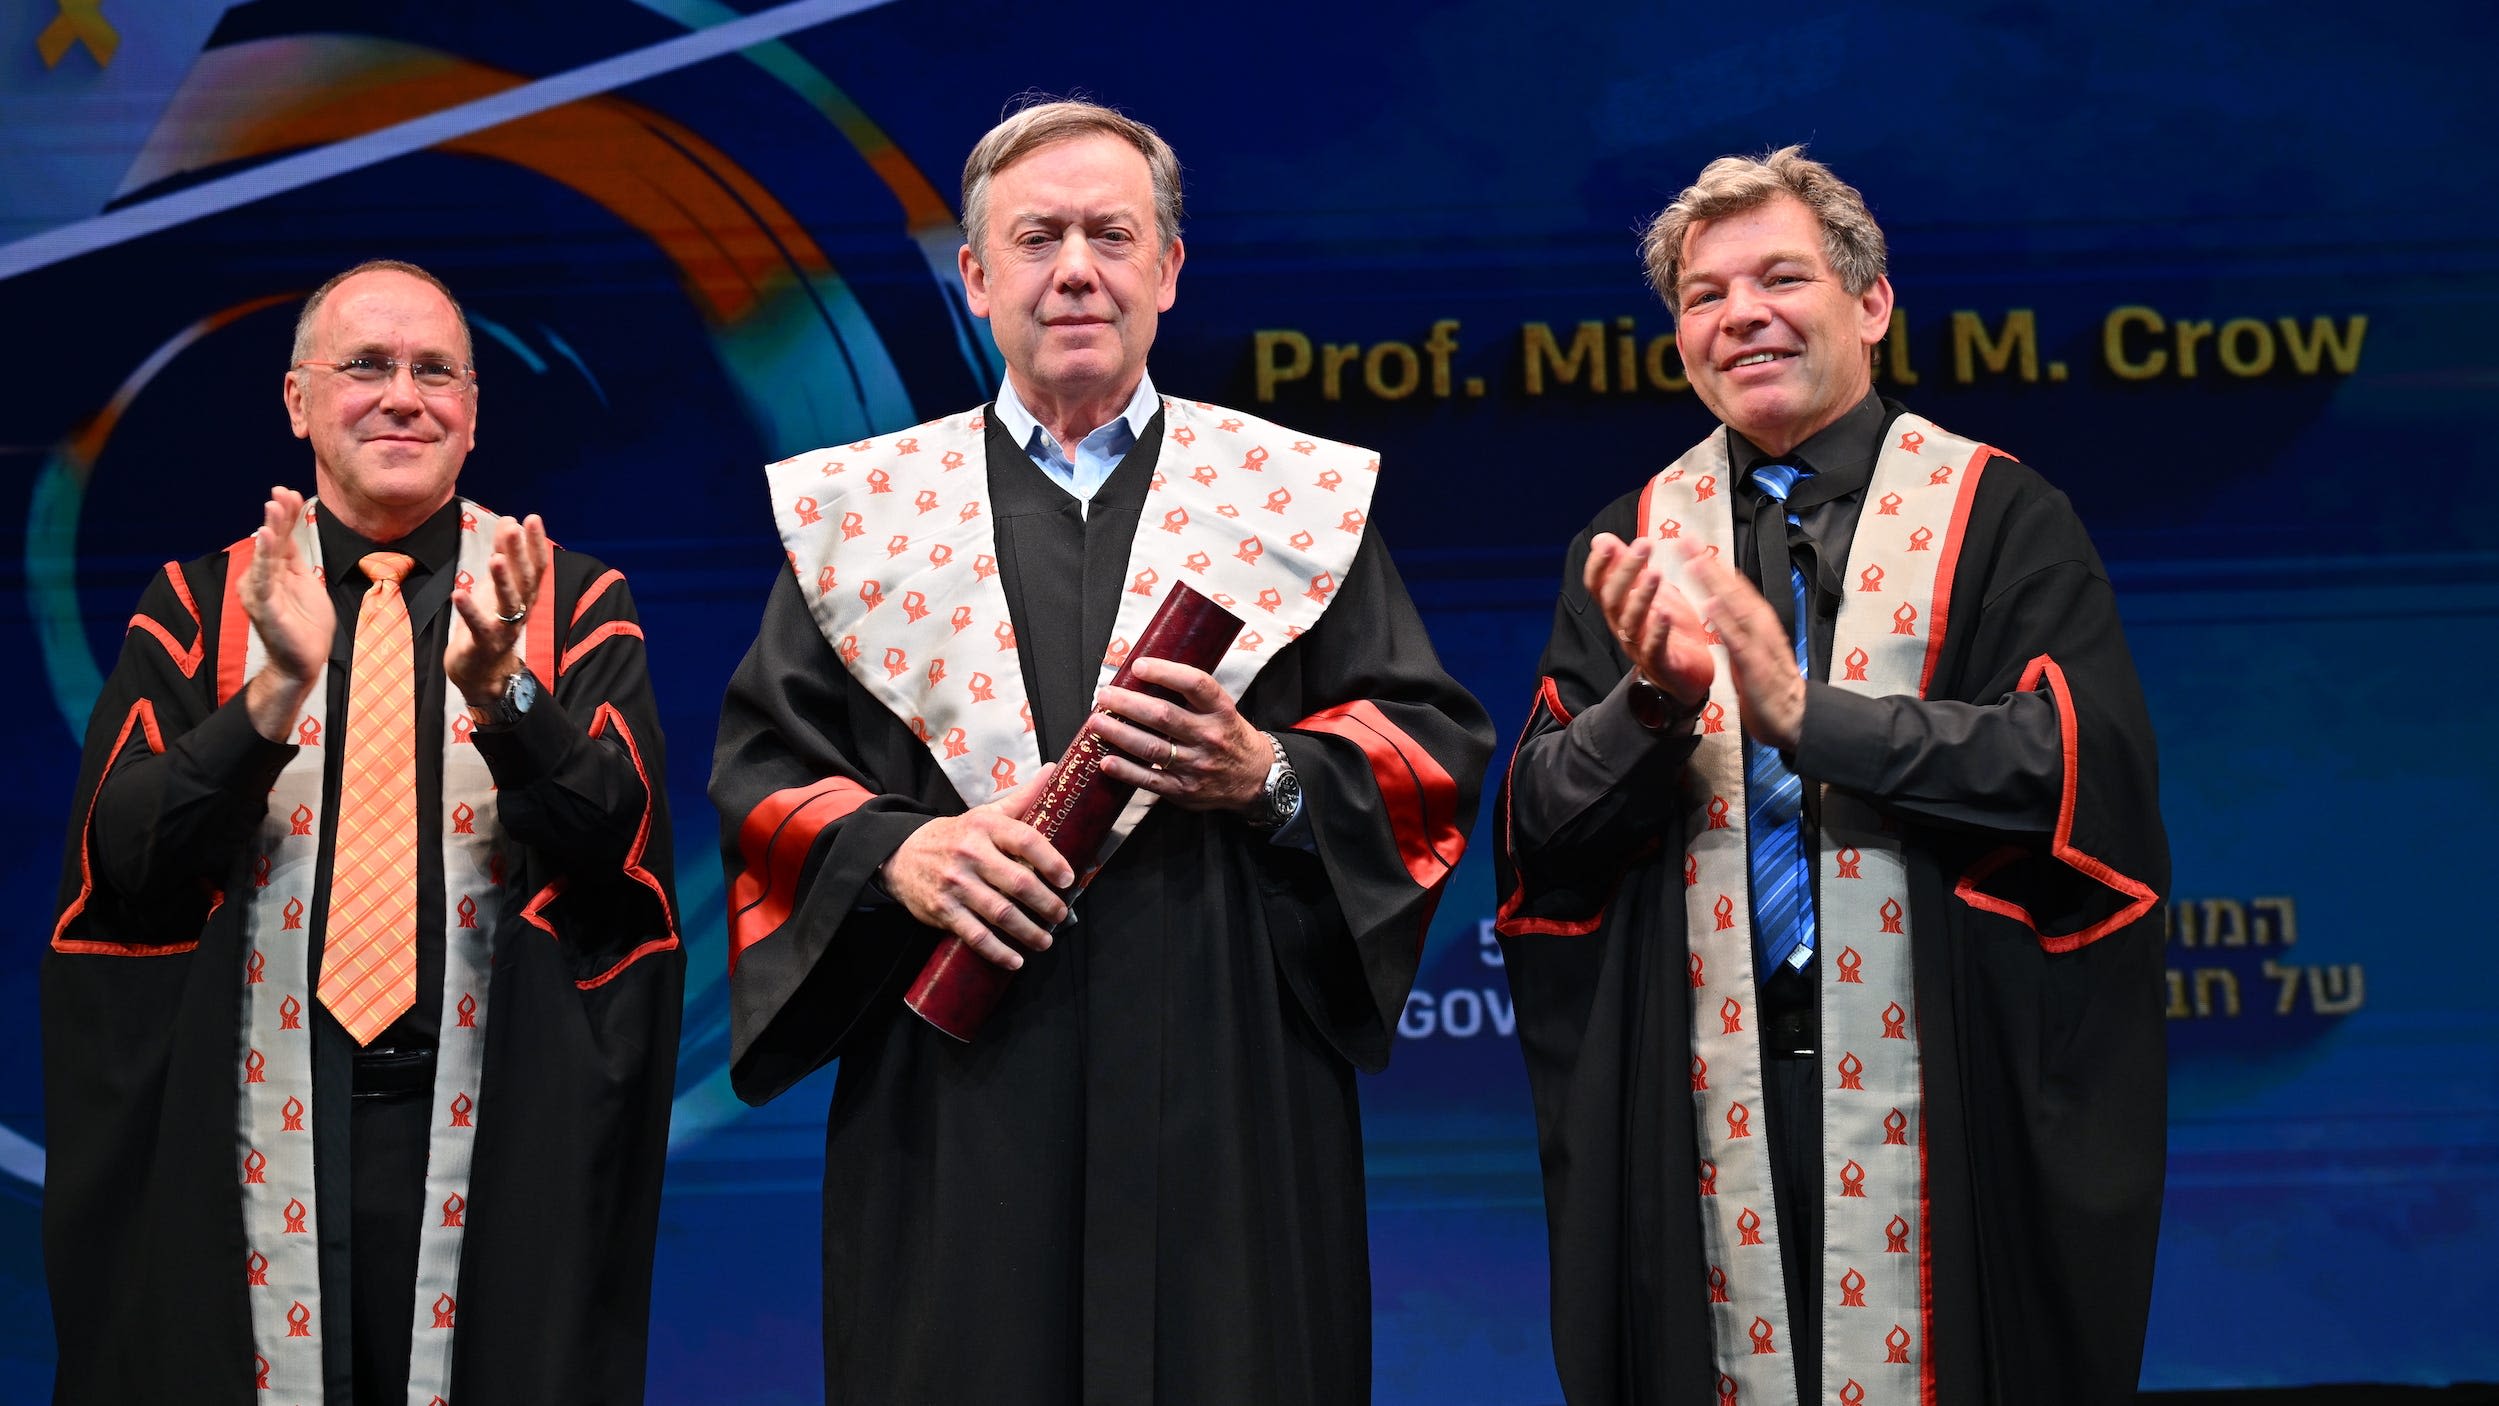 An Israeli university granted ASU President Michael Crow an honorary degree. Here's why